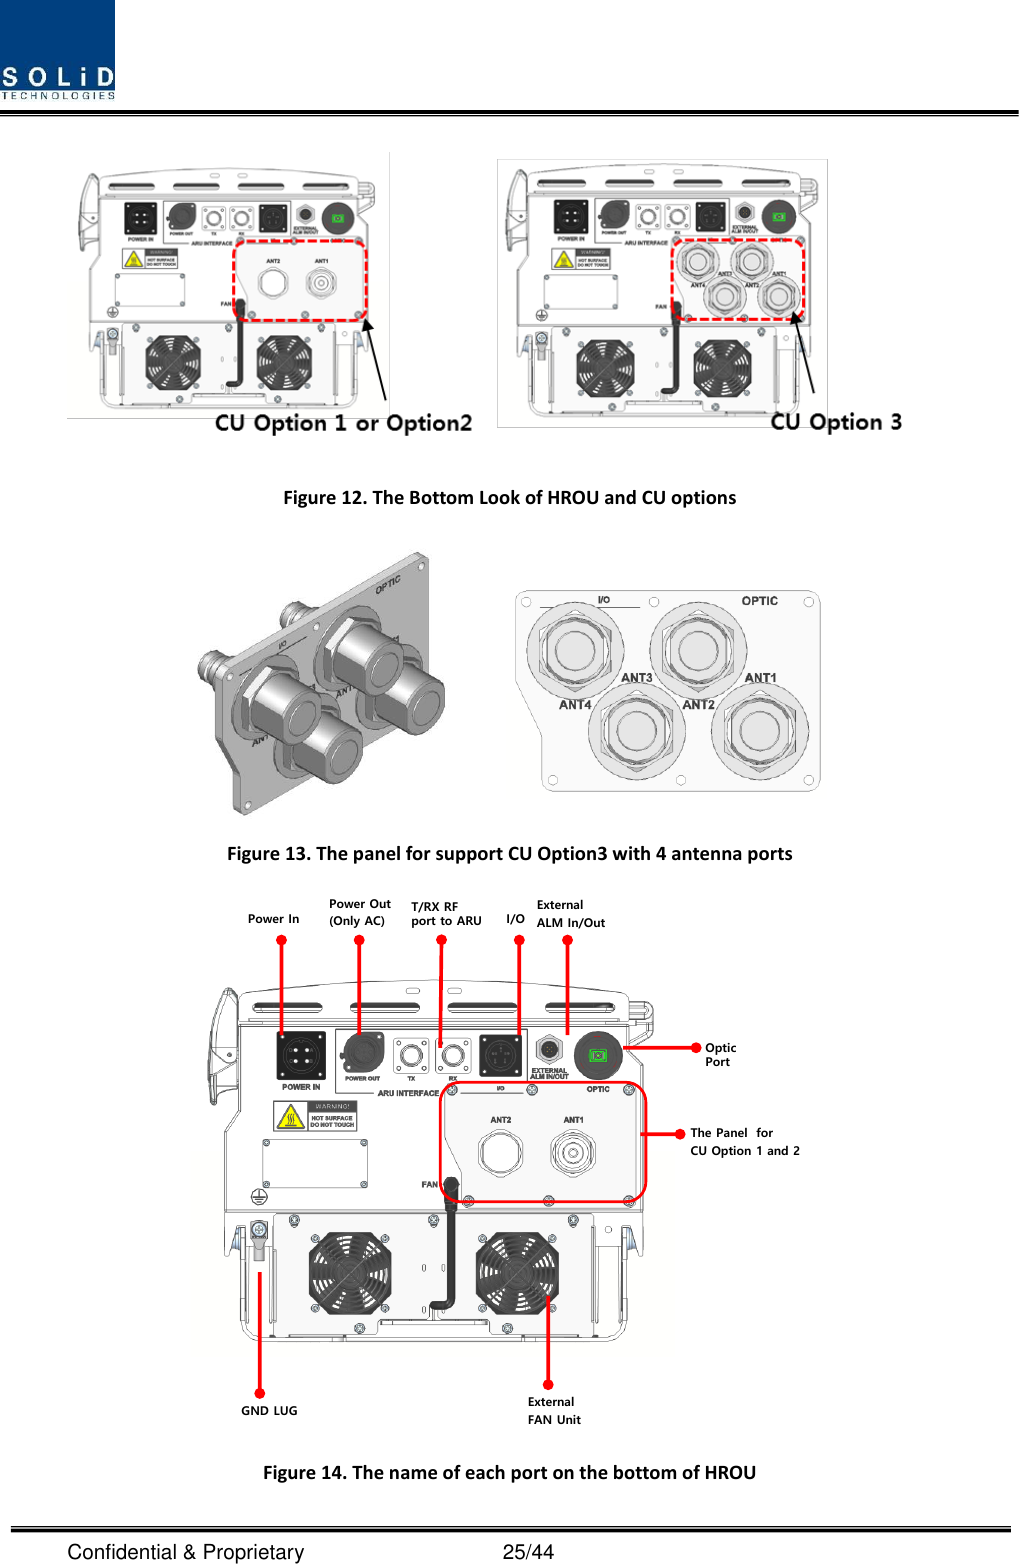  Confidential &amp; Proprietary                                      25/44  Figure 12. The Bottom Look of HROU and CU options  Figure 13. The panel for support CU Option3 with 4 antenna ports  Figure 14. The name of each port on the bottom of HROU  Power InPower Out(Only AC)T/RX RF port to ARU  I/OExternalALM In/OutExternalFAN UnitGND LUG Optic PortThe Panel  for CU Option 1 and 2